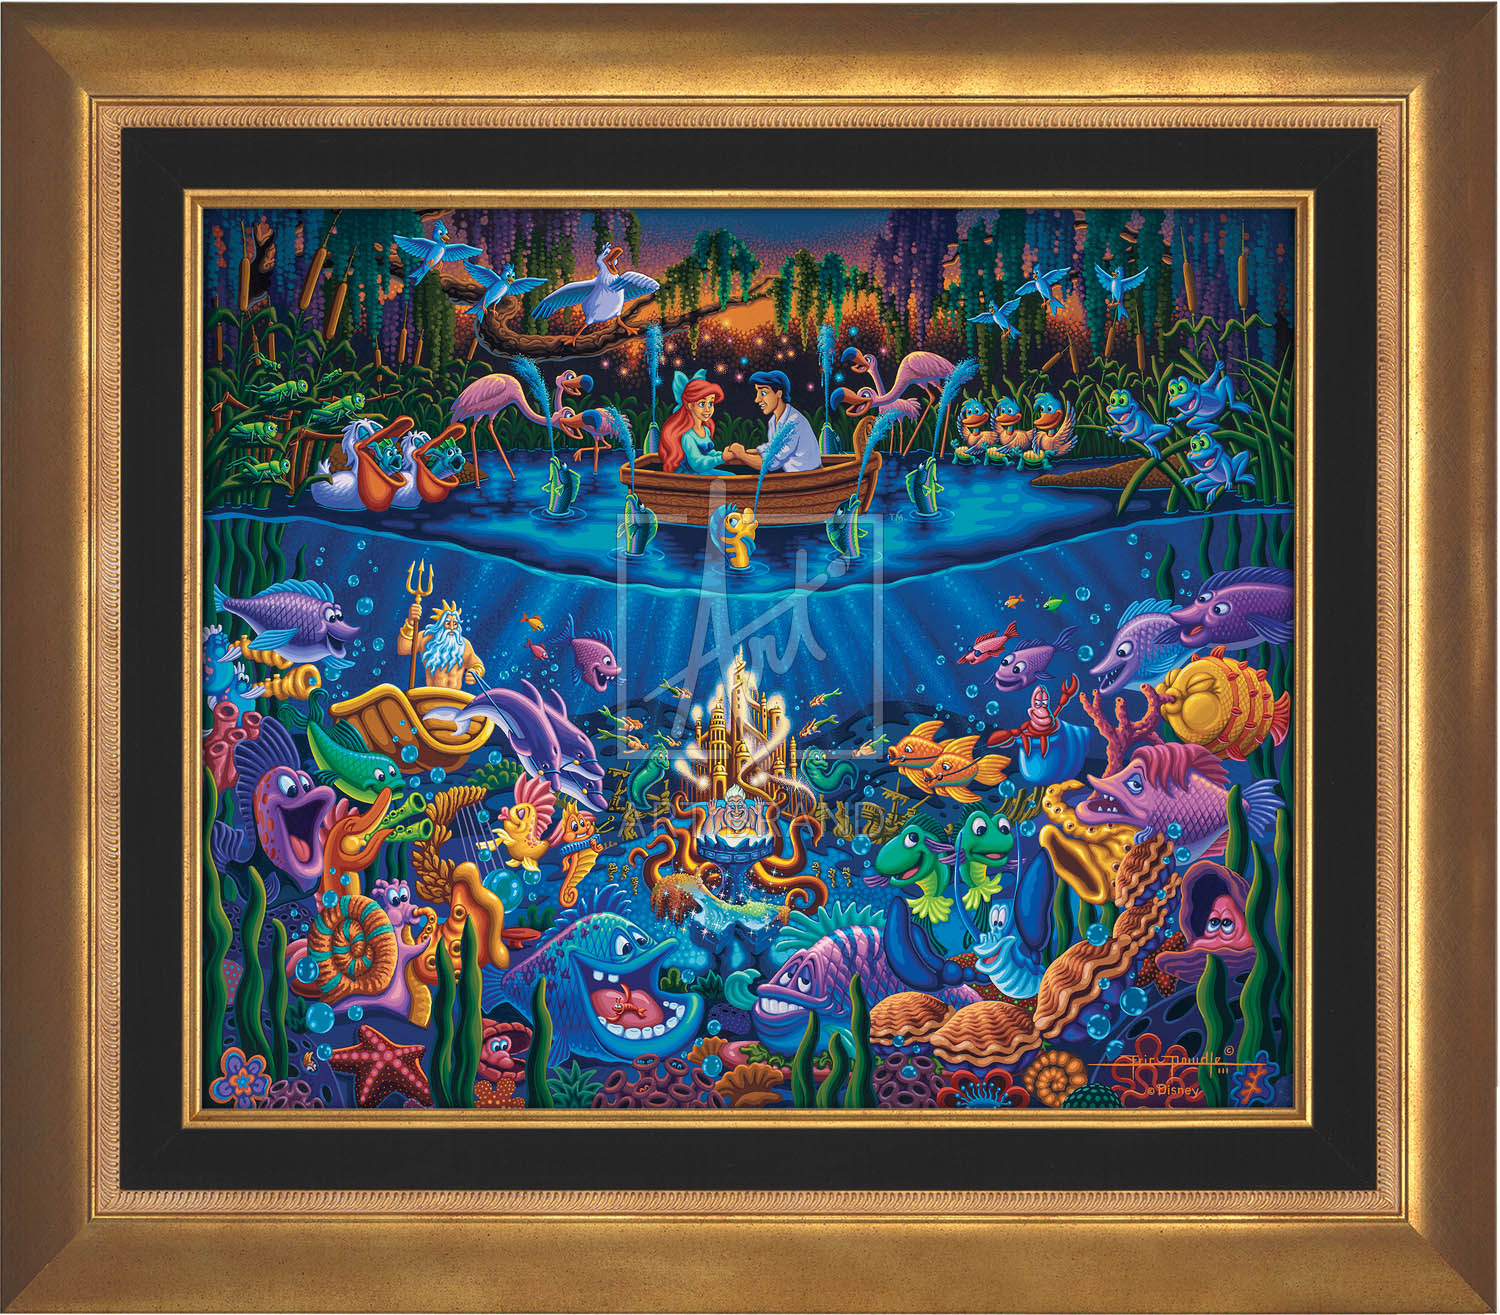 Ariel’s closest friend and confidante, Flounder, adds to the ambiance as he and six friends create a makeshift fountain around Eric’s boat - Aurora Gold Frame.